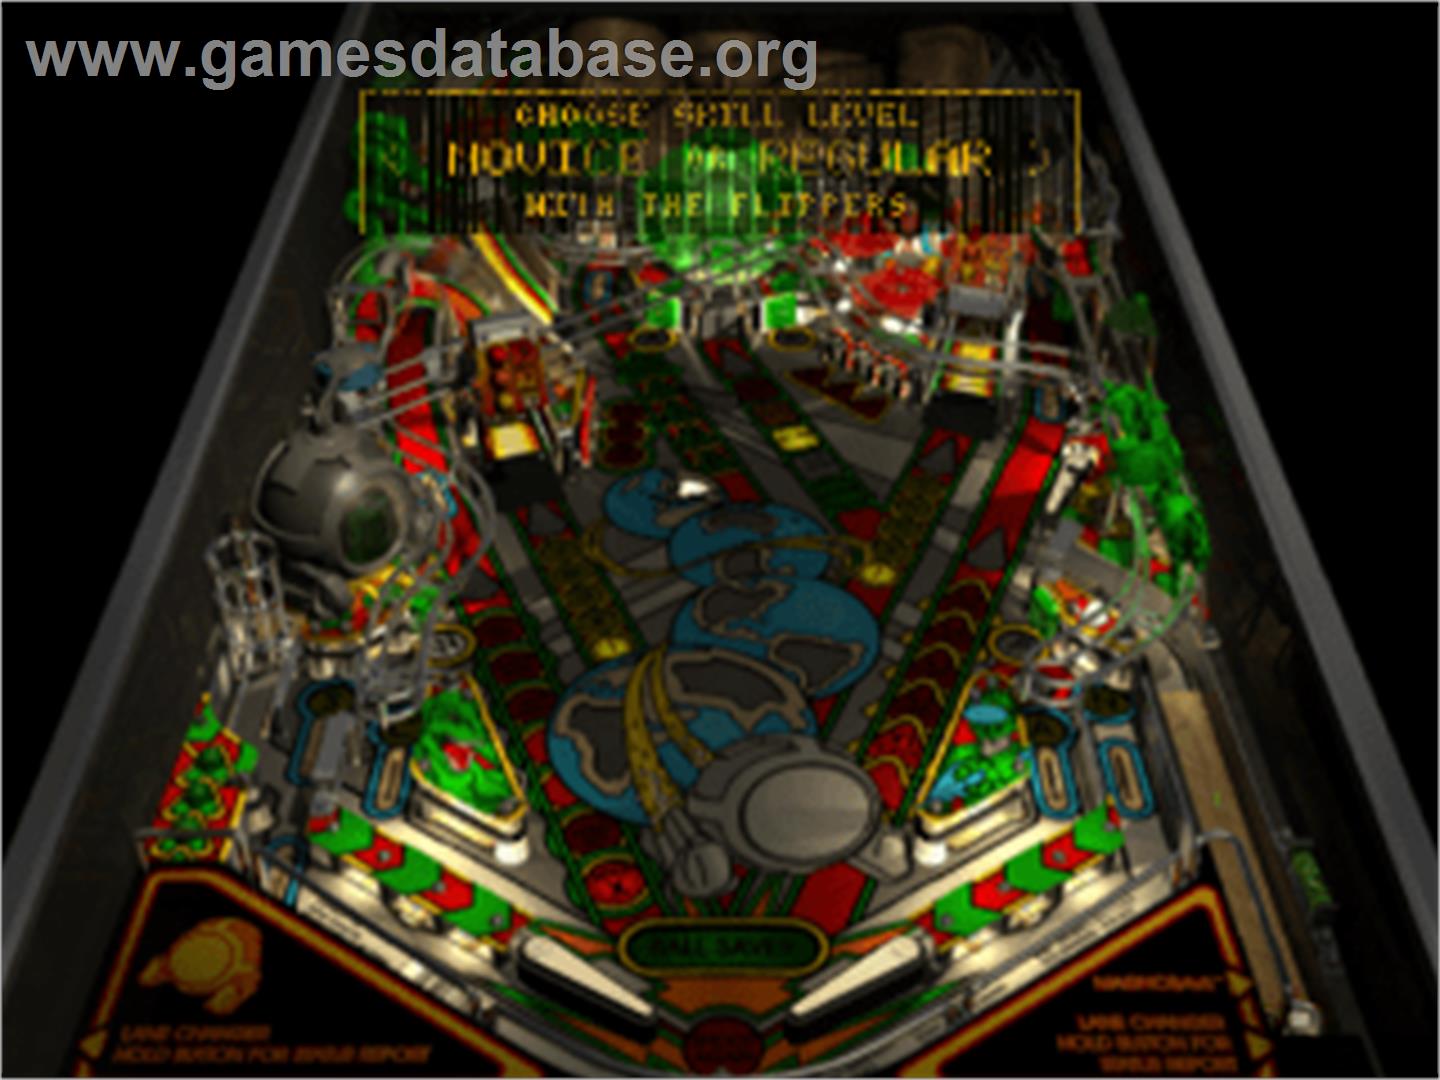 Pro Pinball: Timeshock! - Sony Playstation - Artwork - In Game